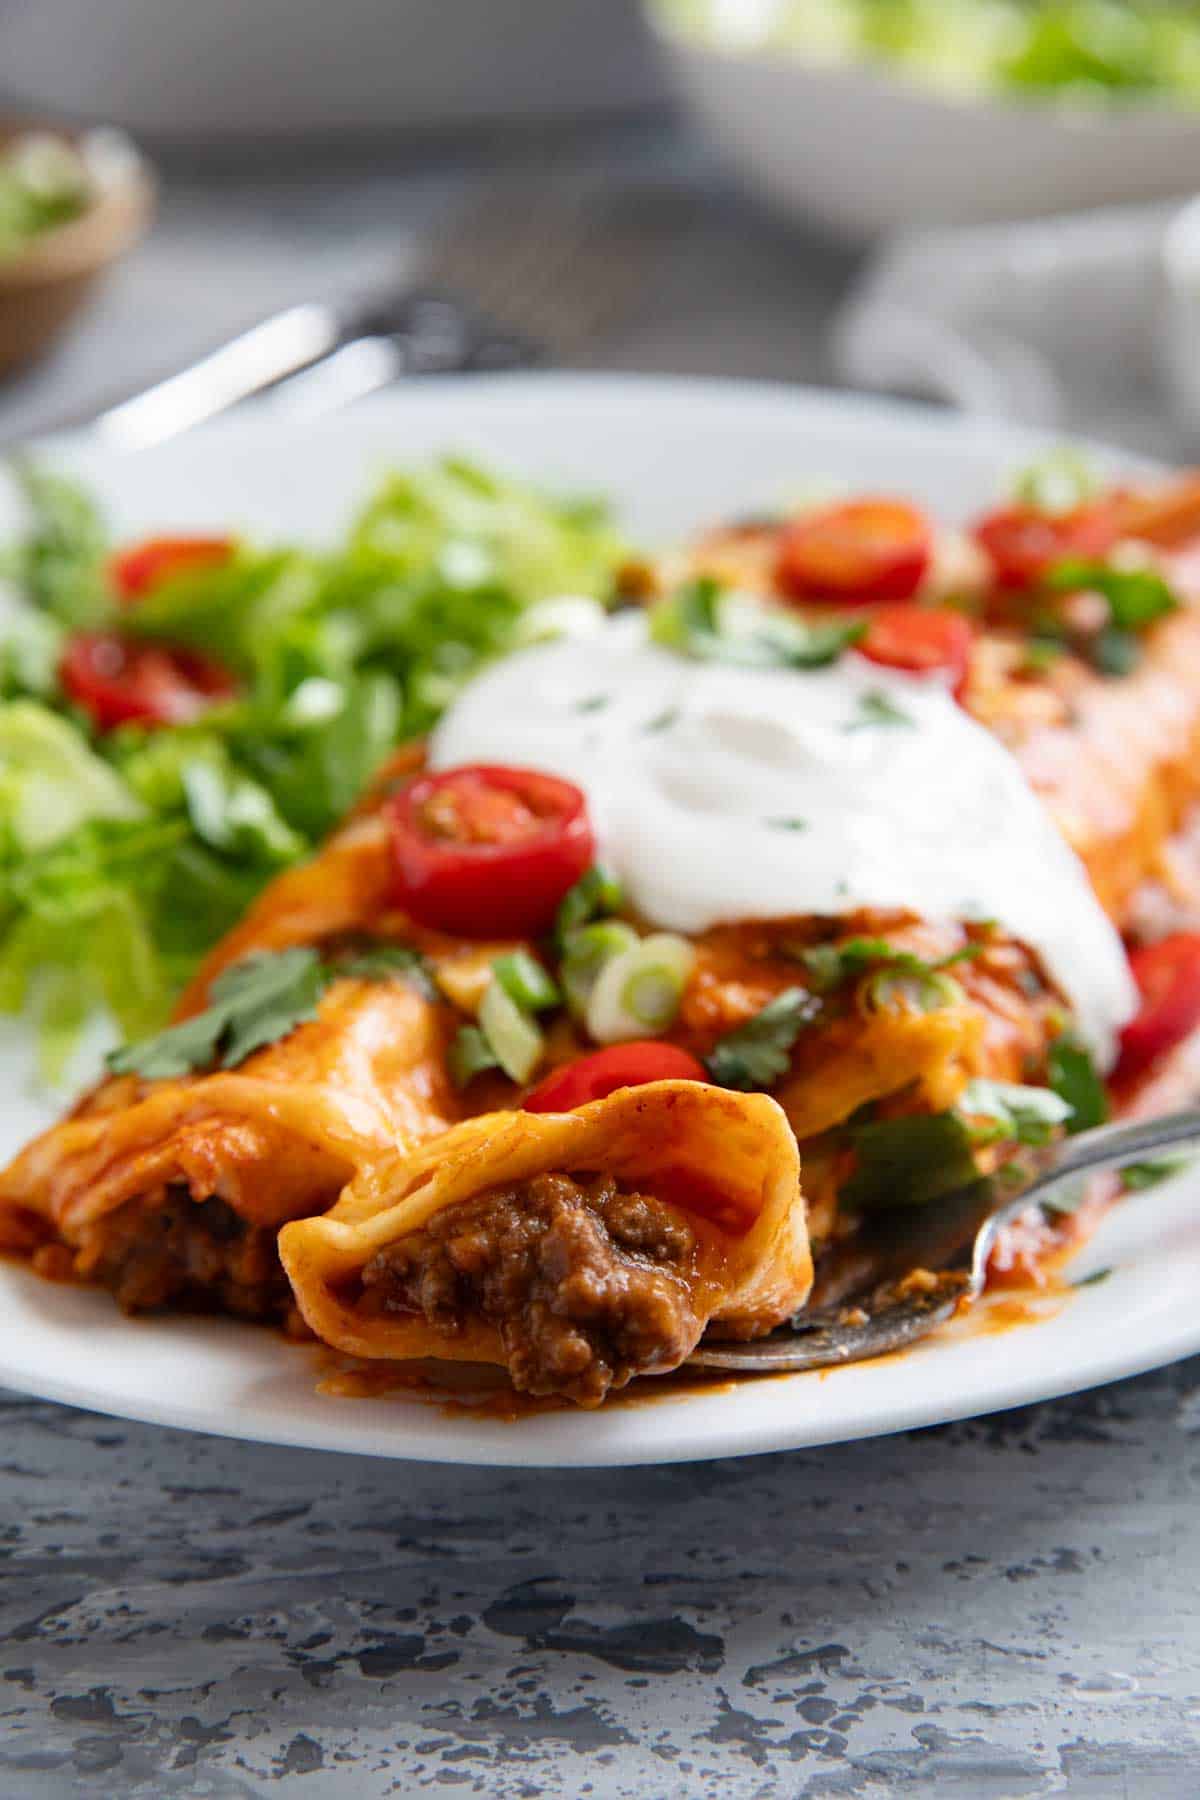 Ground beef enchiladas with a forkful being taken from one enchilada.